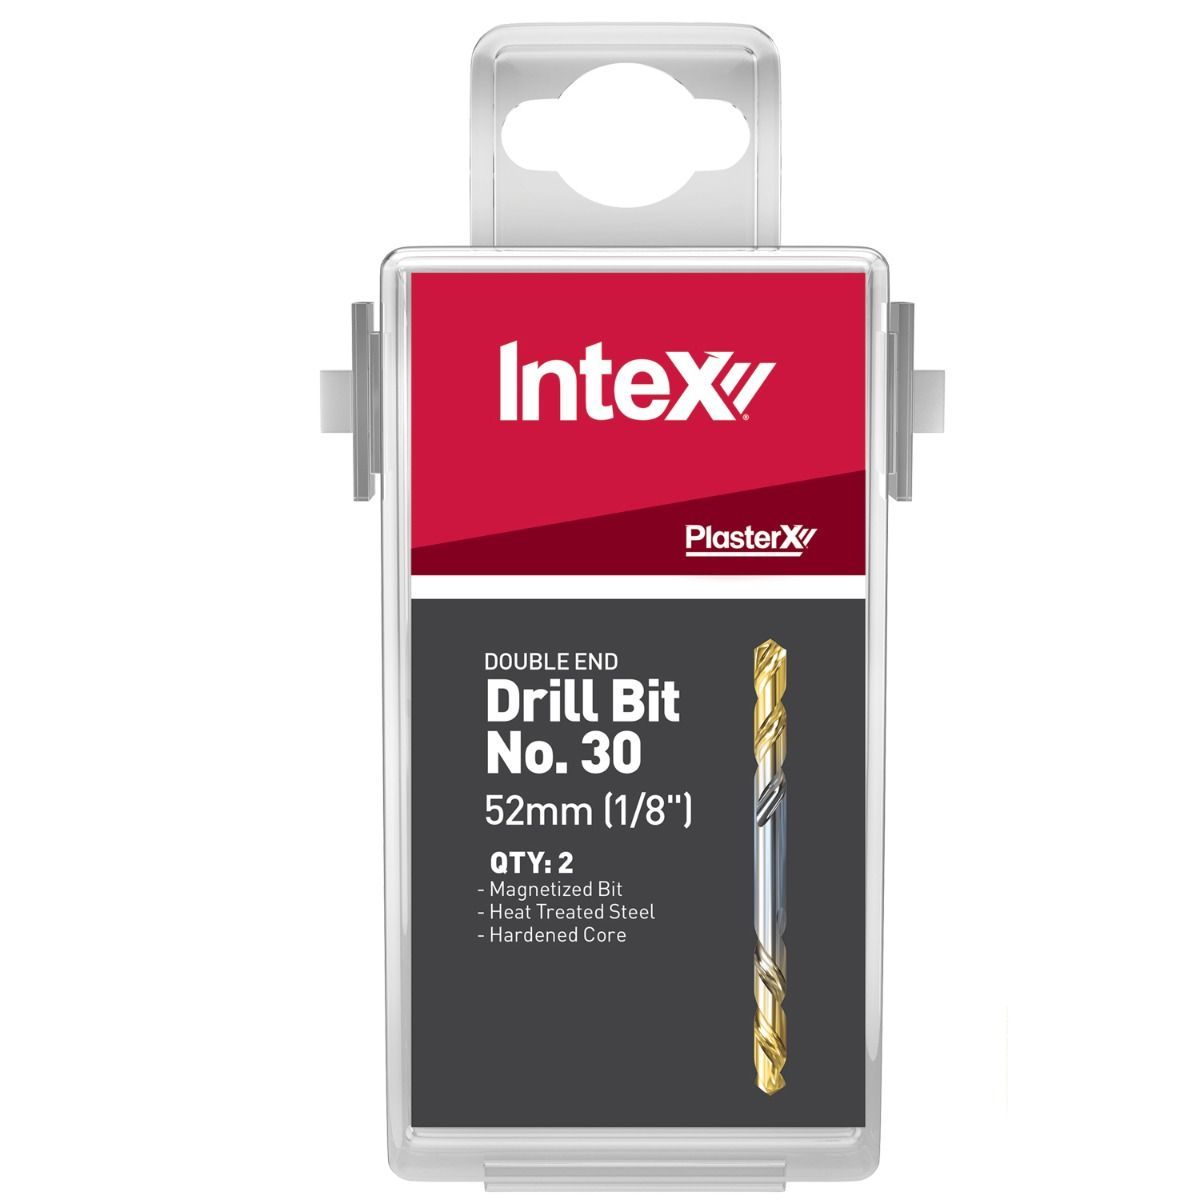 Intex MegaFix® Double End Drill Bit No. 30 (1/8in) (Pack of 10)